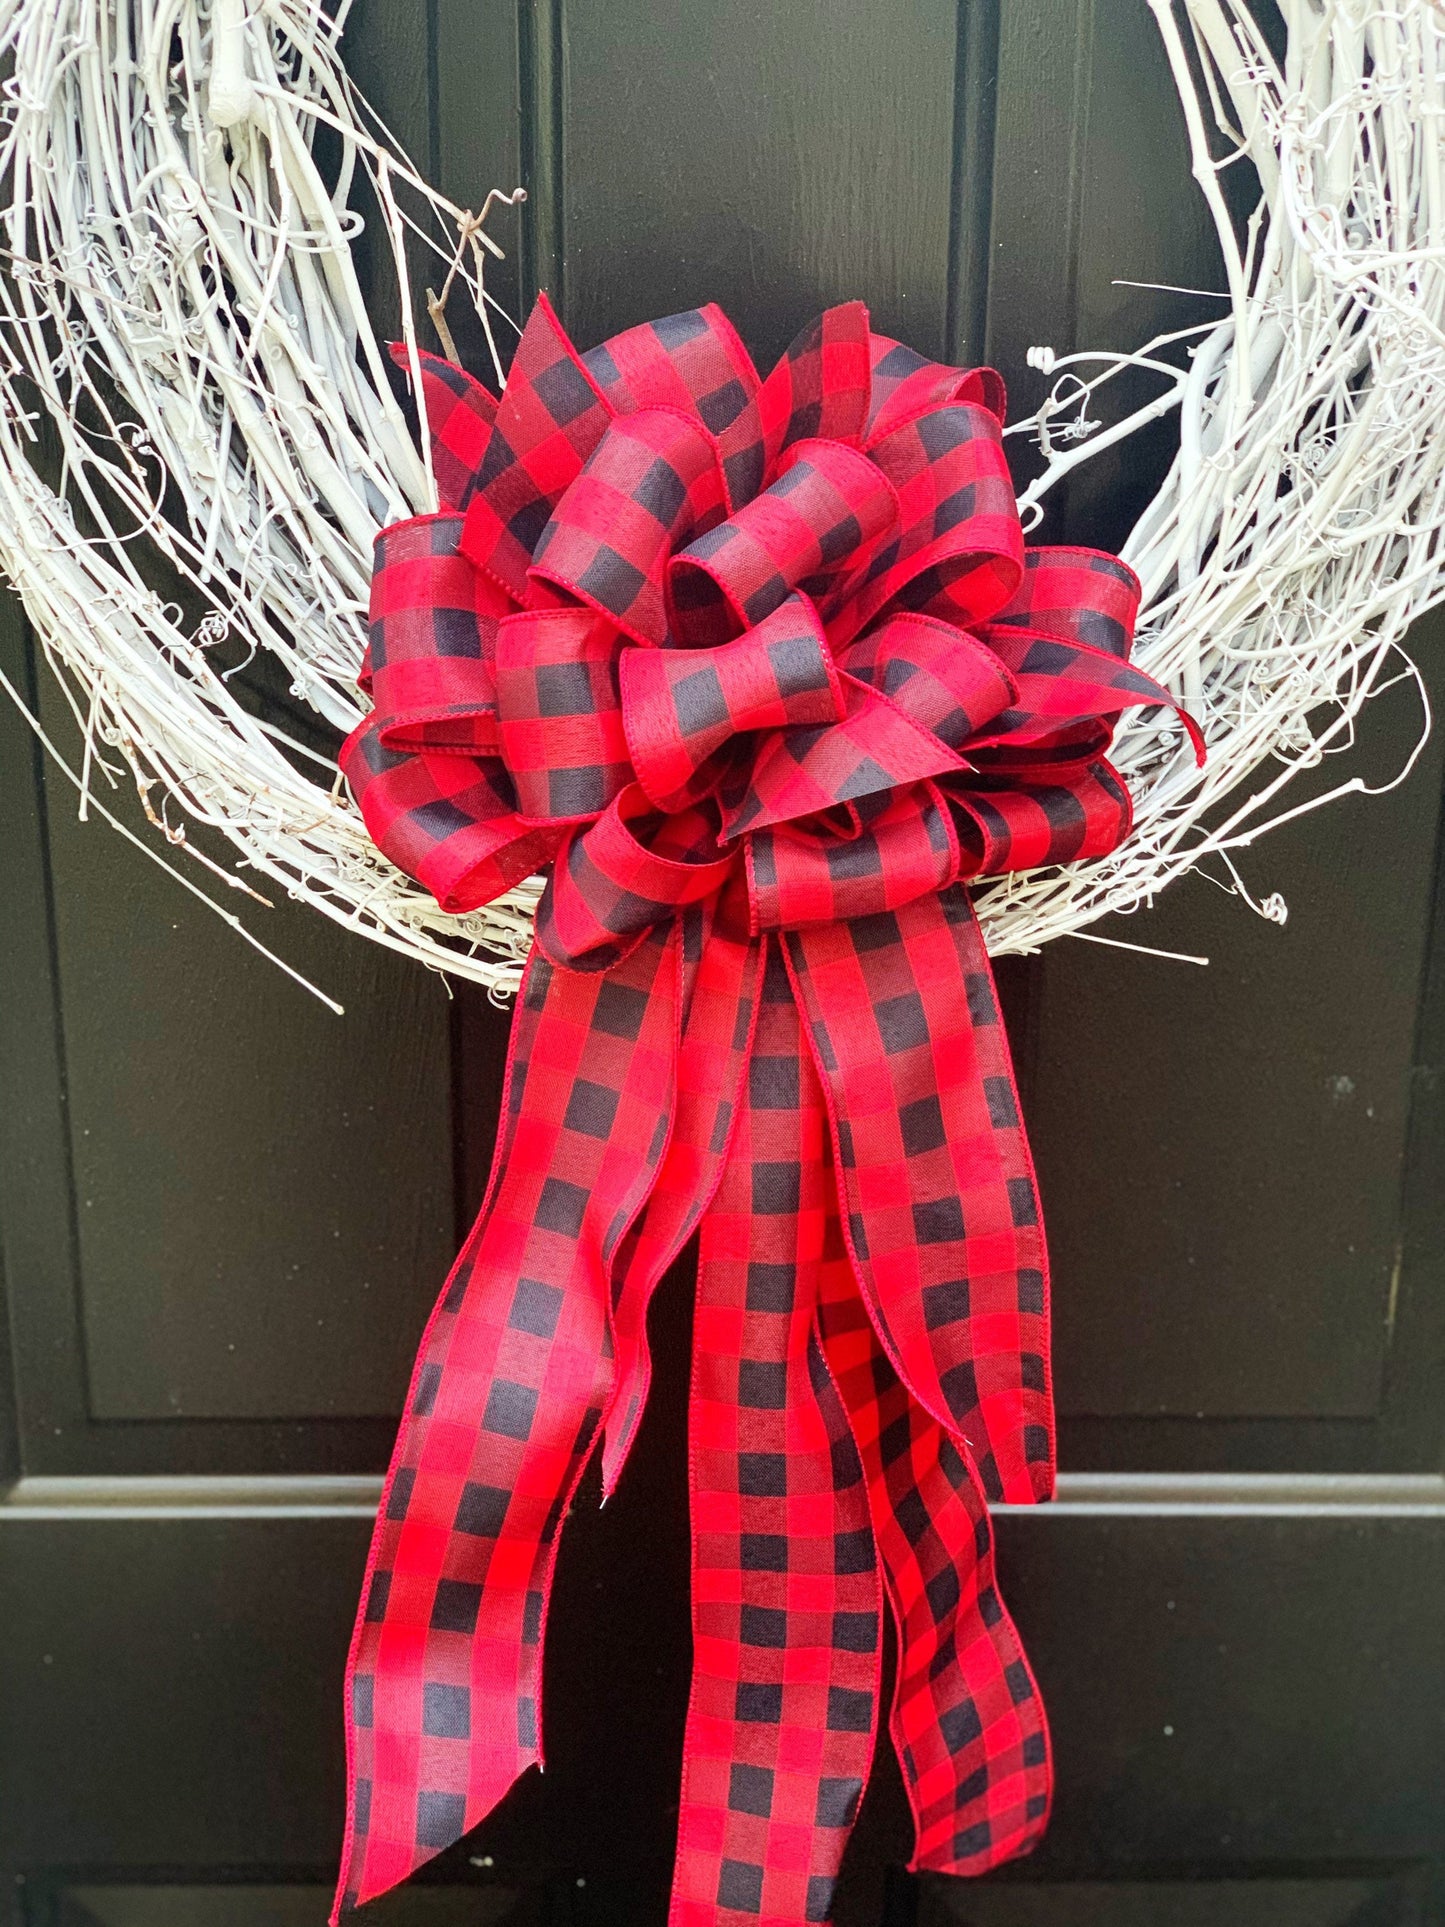 Everyday Collection - Red/Black Bow, Red Bow, Black Bow, Mailbox Bow,Wreath Bow,Large Bow, Value Bow,Buffalo Check Bow,Buffalo Check Ribbon